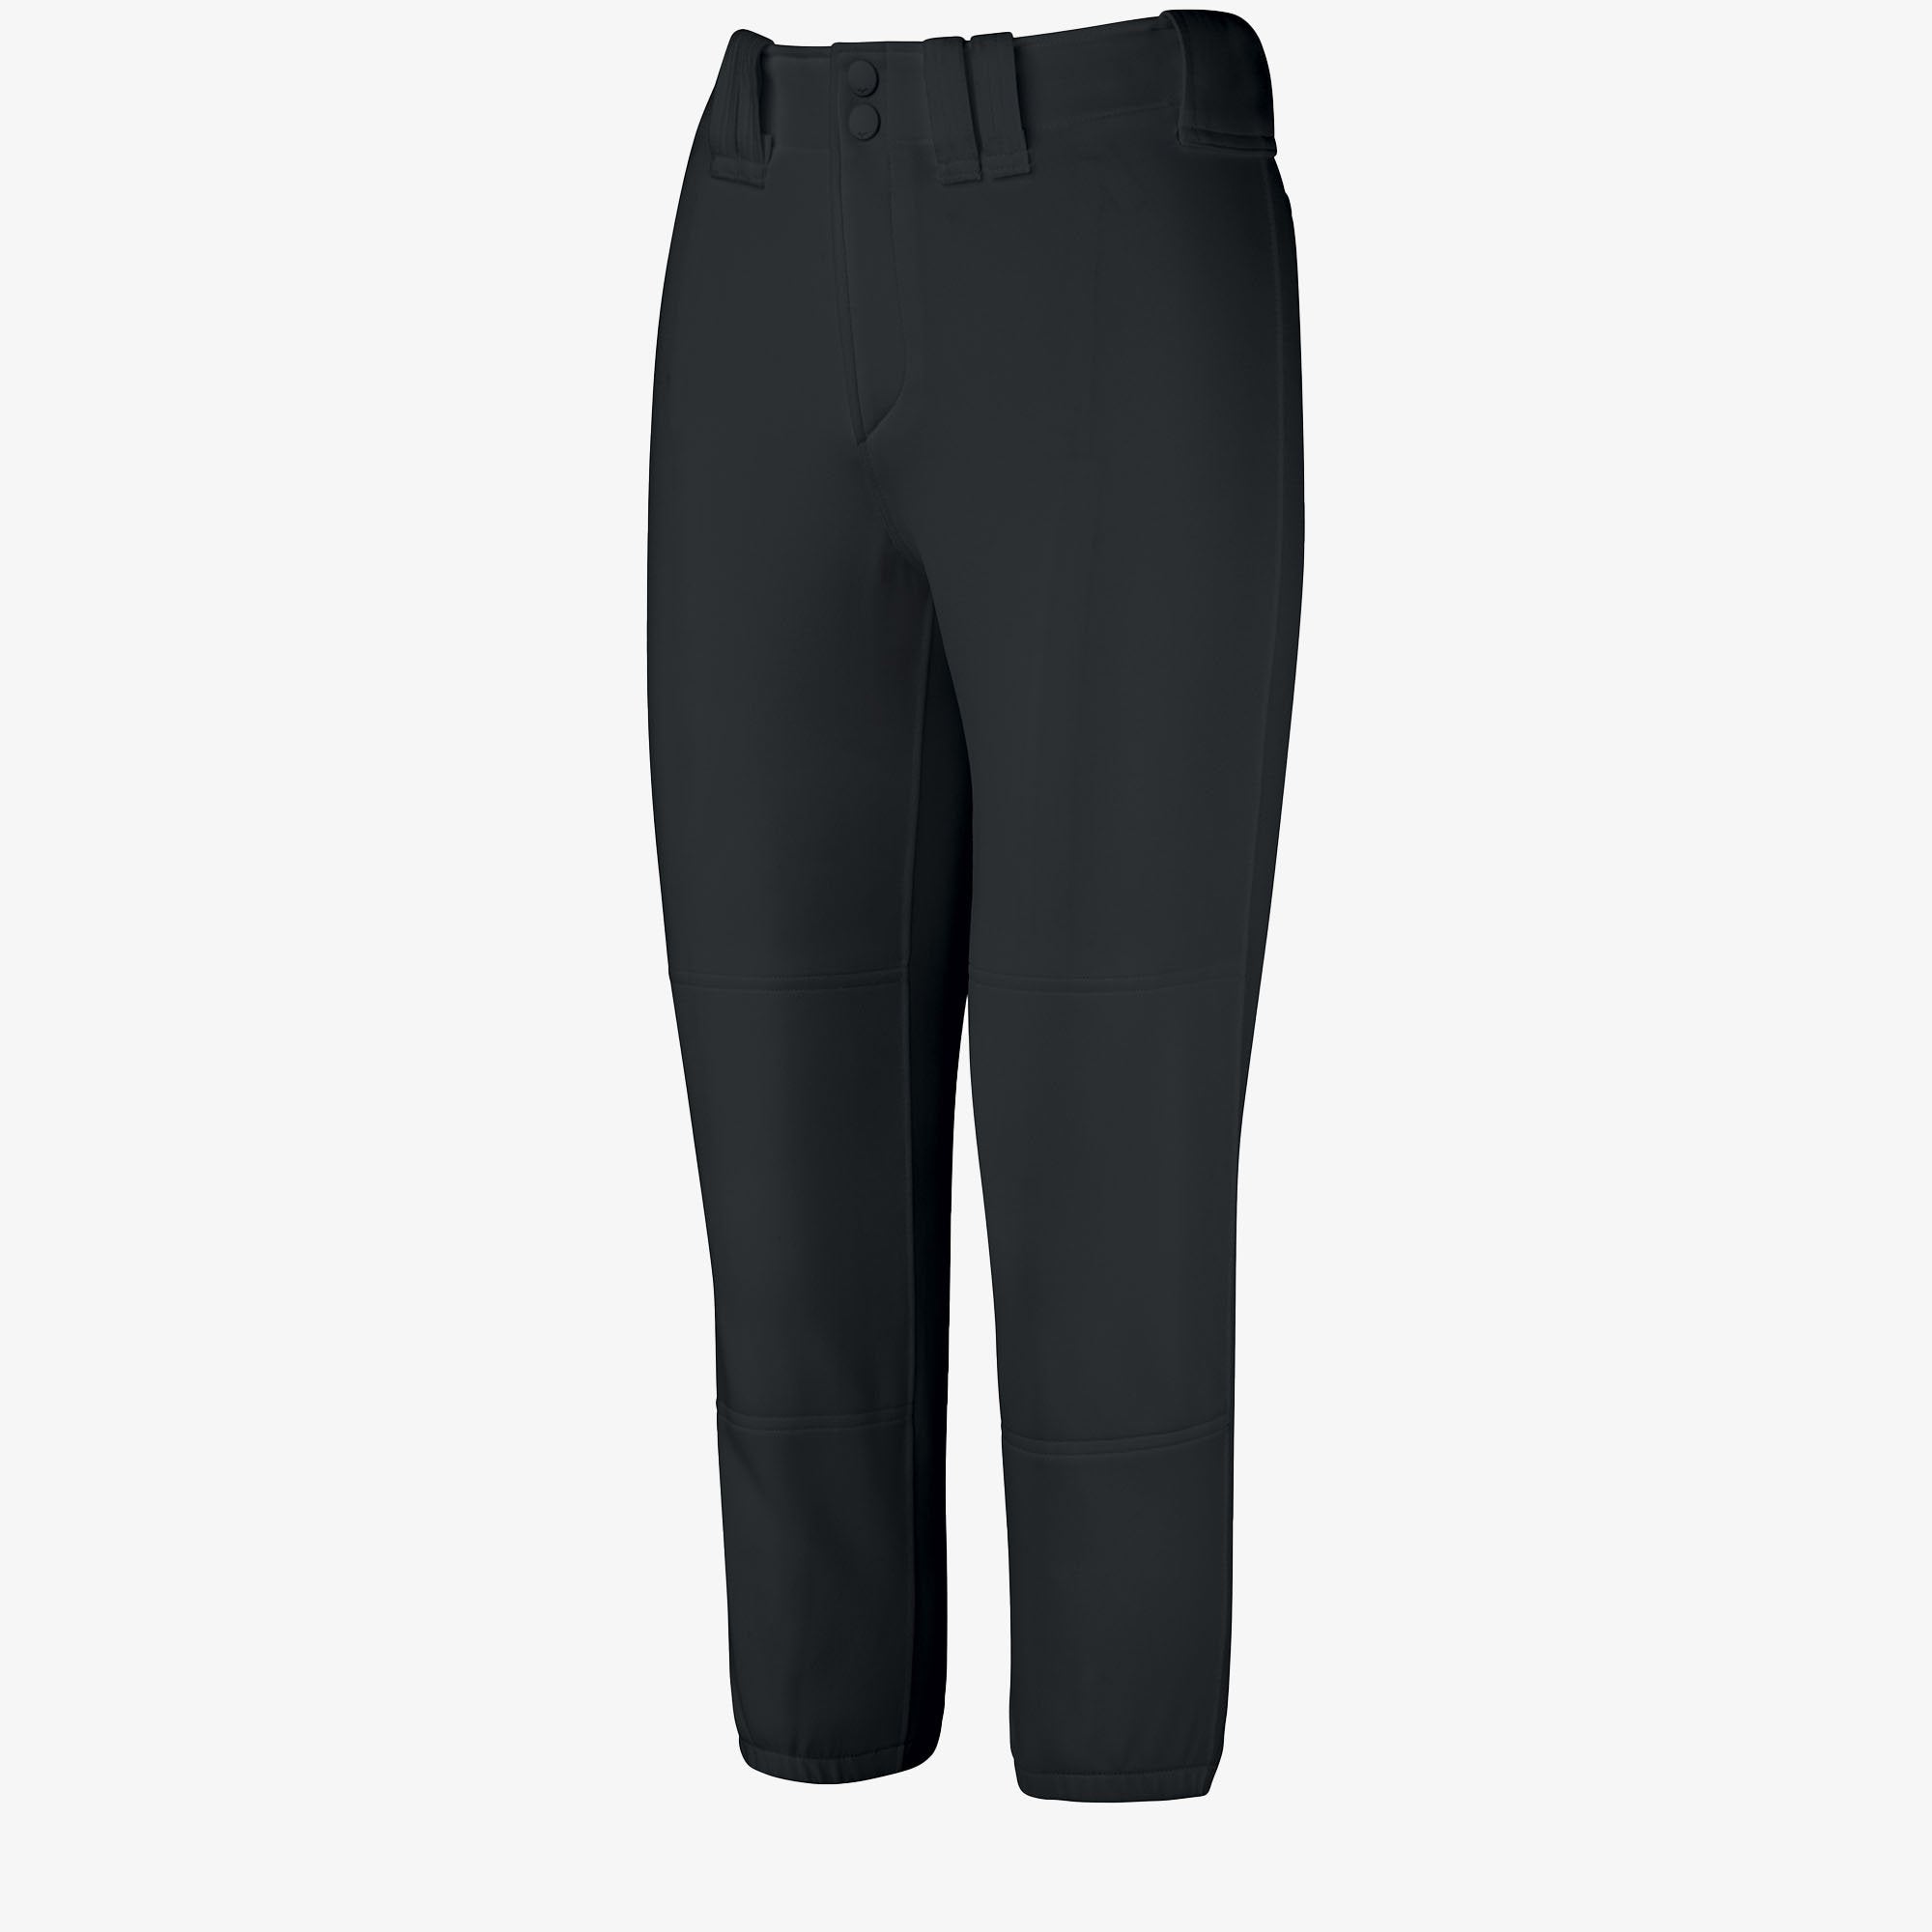 Alleson Athletic 605WLPW Open Bottom Womens Fastpitch Softball Pants